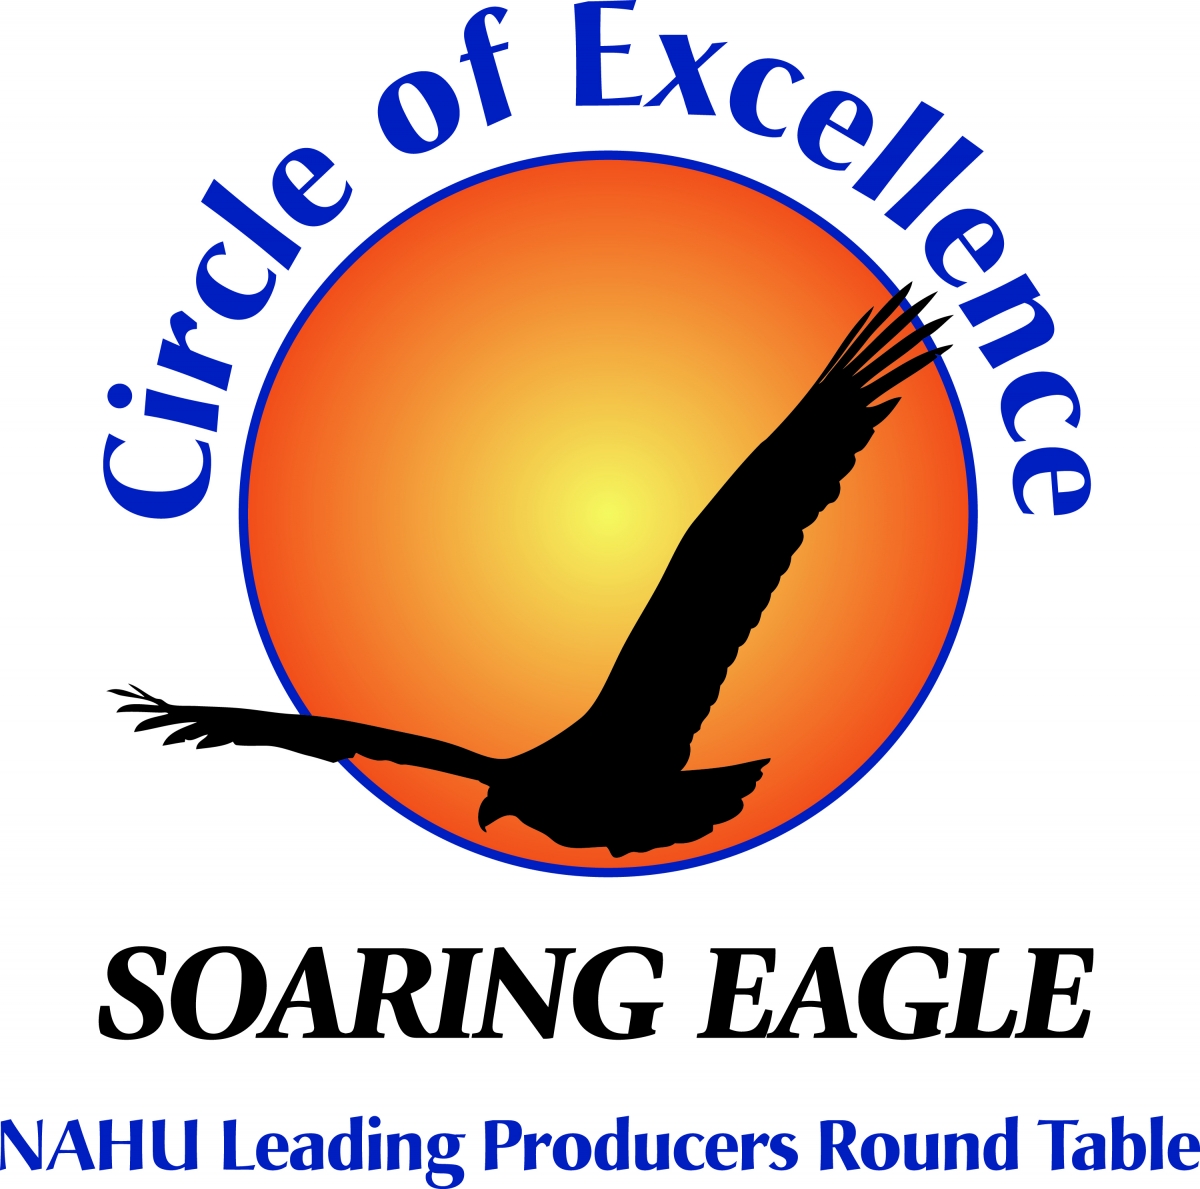 The Wilson Agency Qualifies for Soaring Eagle Award | Wilson Agency